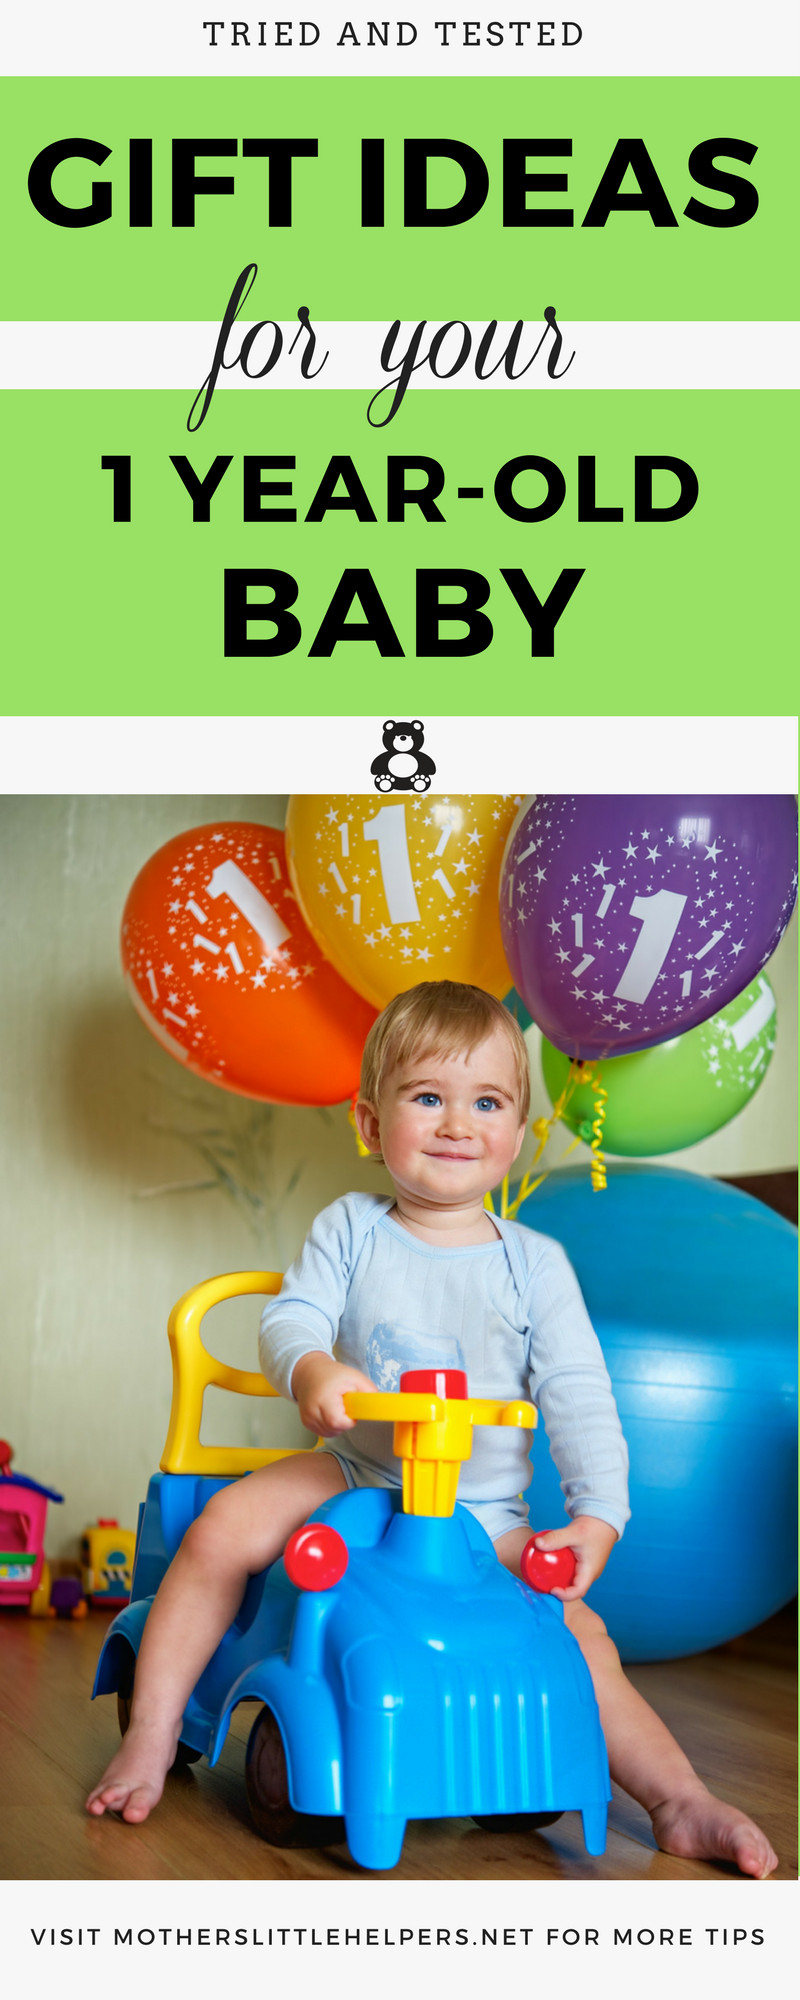 Baby'S First Birthday Gift Ideas For Her
 Best Gift for e Year Old Baby Gift Guide 2019